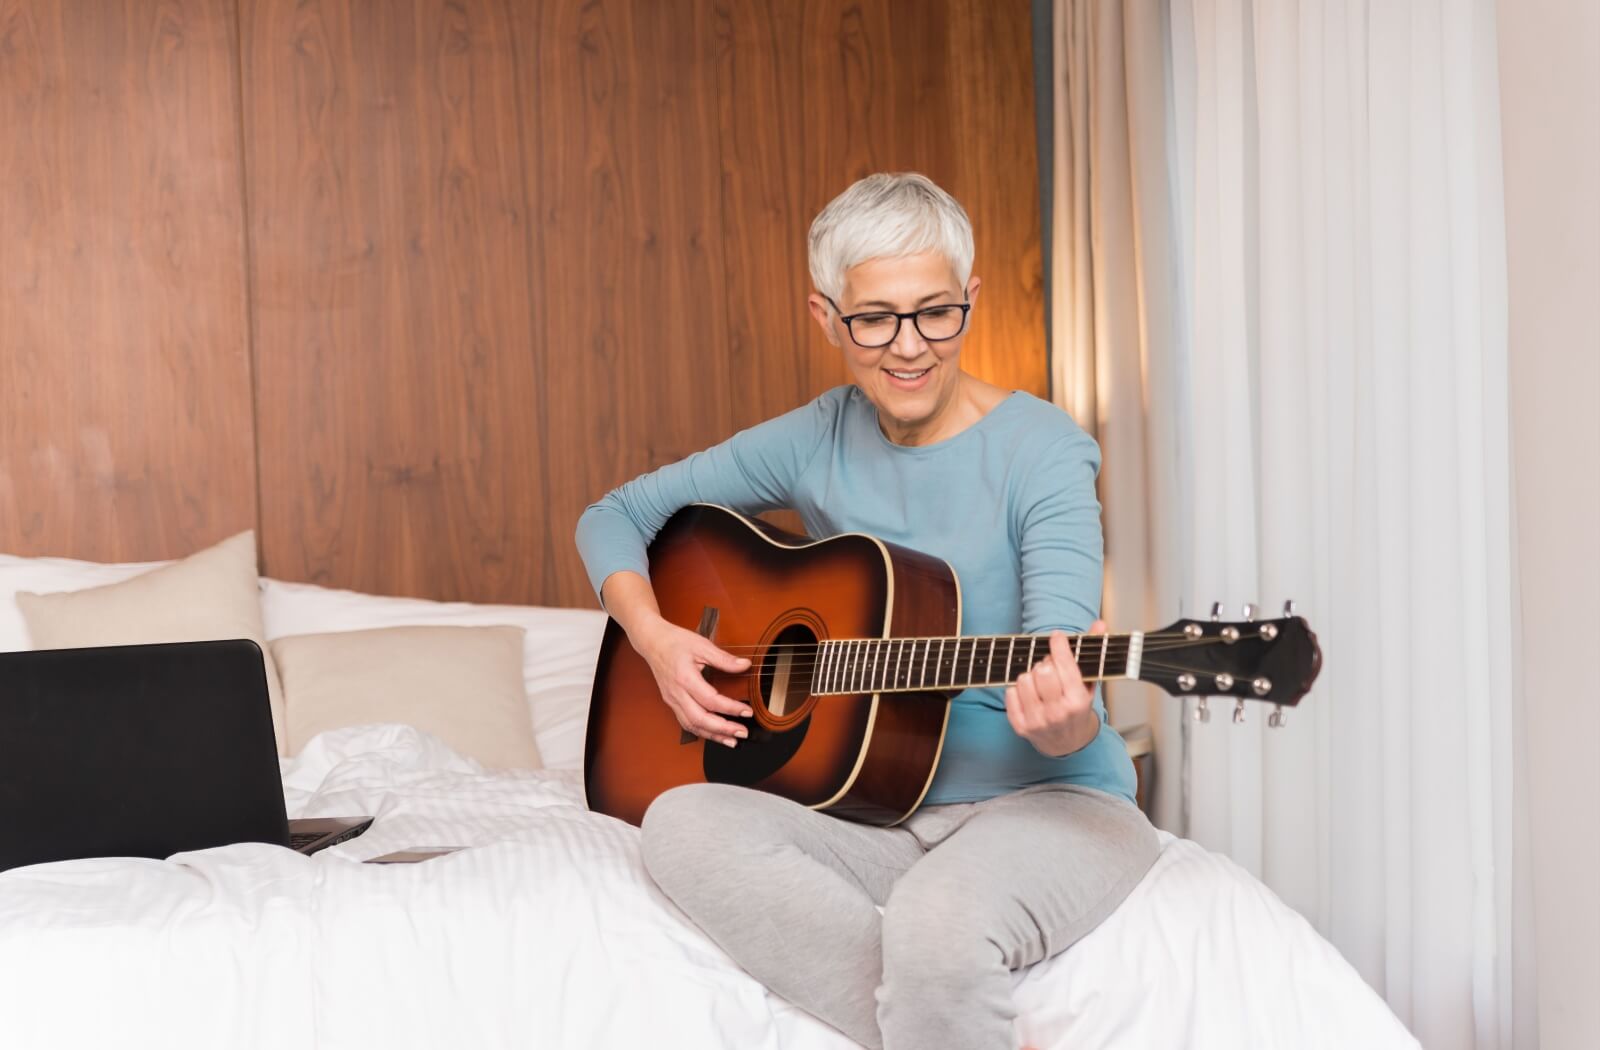 An older adult woman playing the guitar in her bedroom.